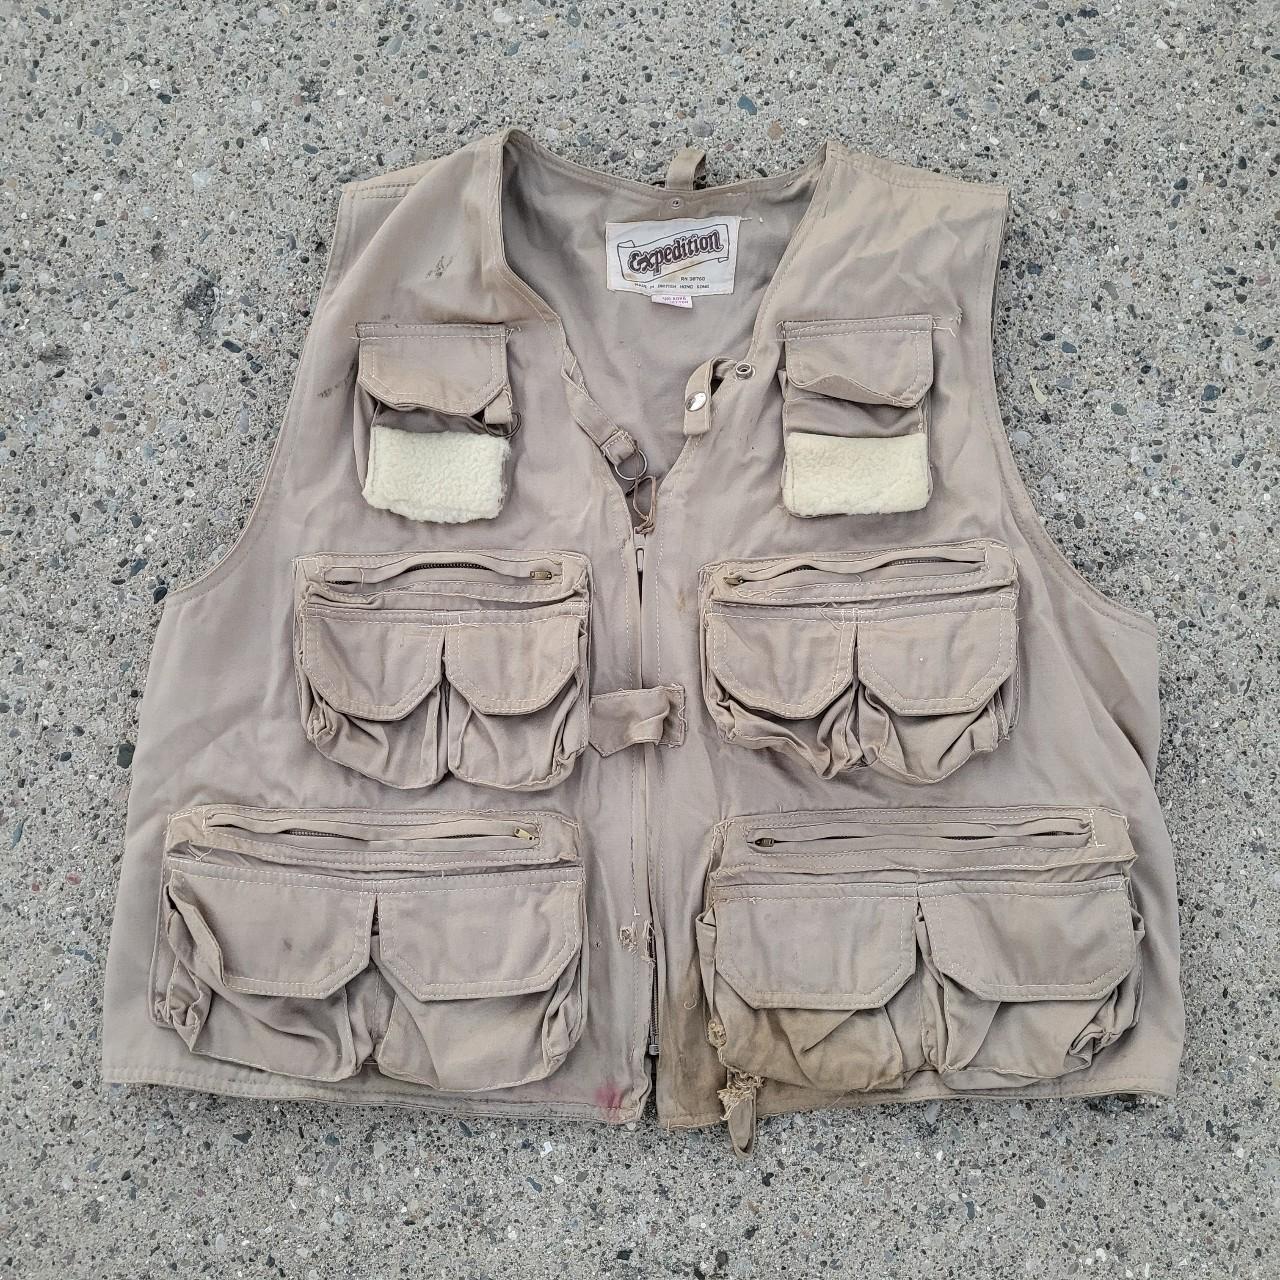 Vintage 80s Fly Fishing Utility Vest Free shipping - Depop